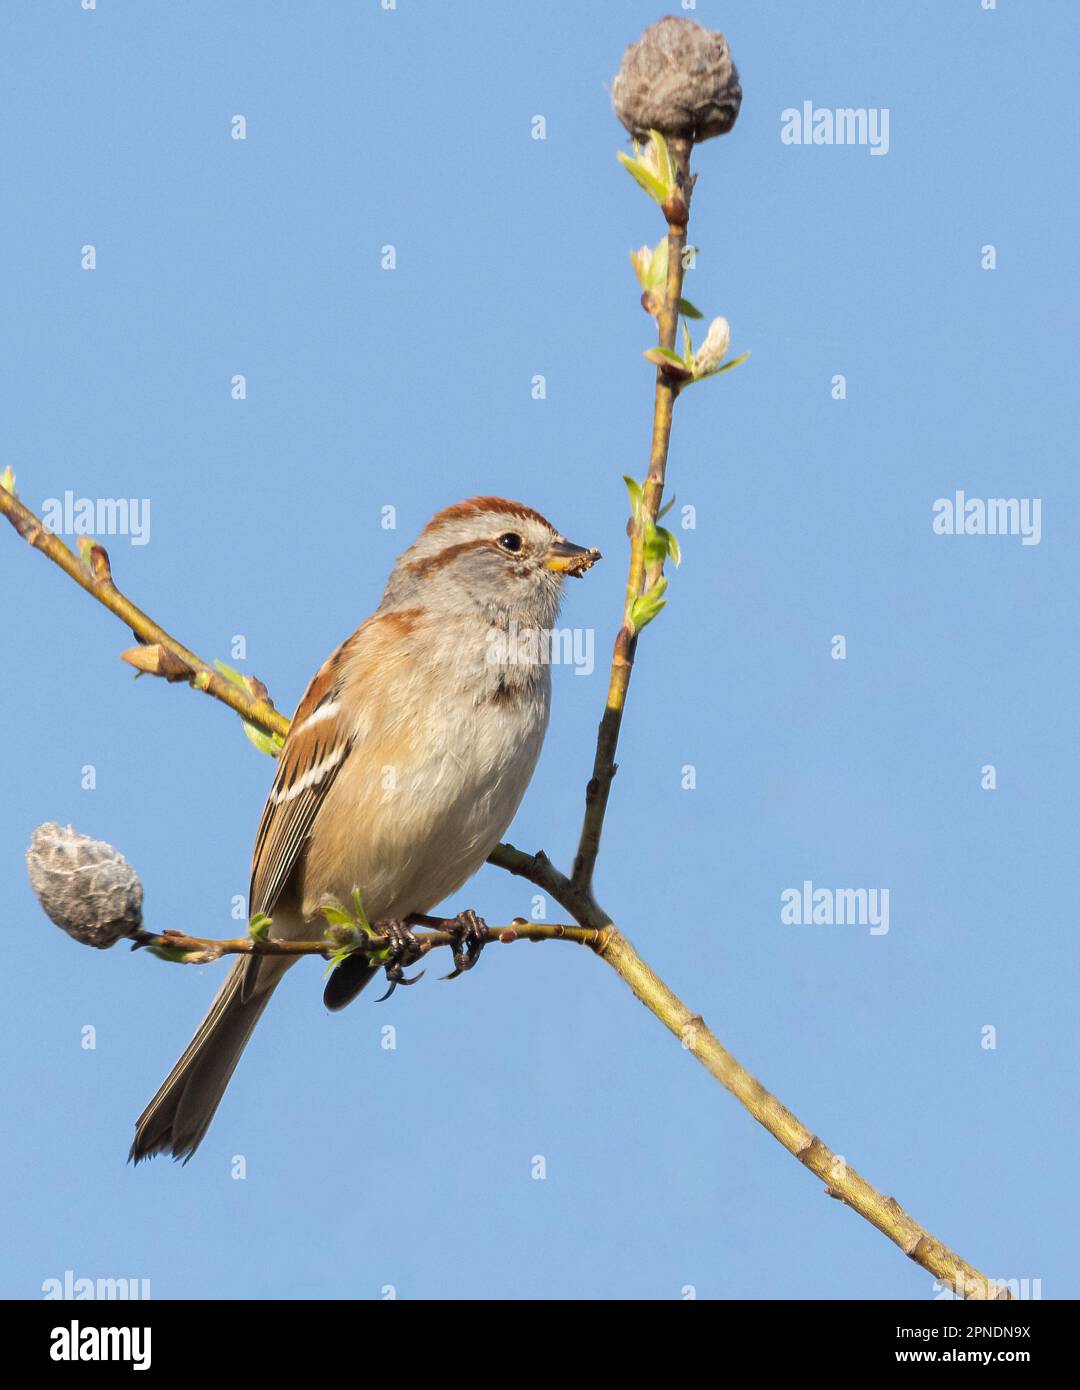 An American Tree Sparrow in a shrub in springtime with blue sky background Stock Photo